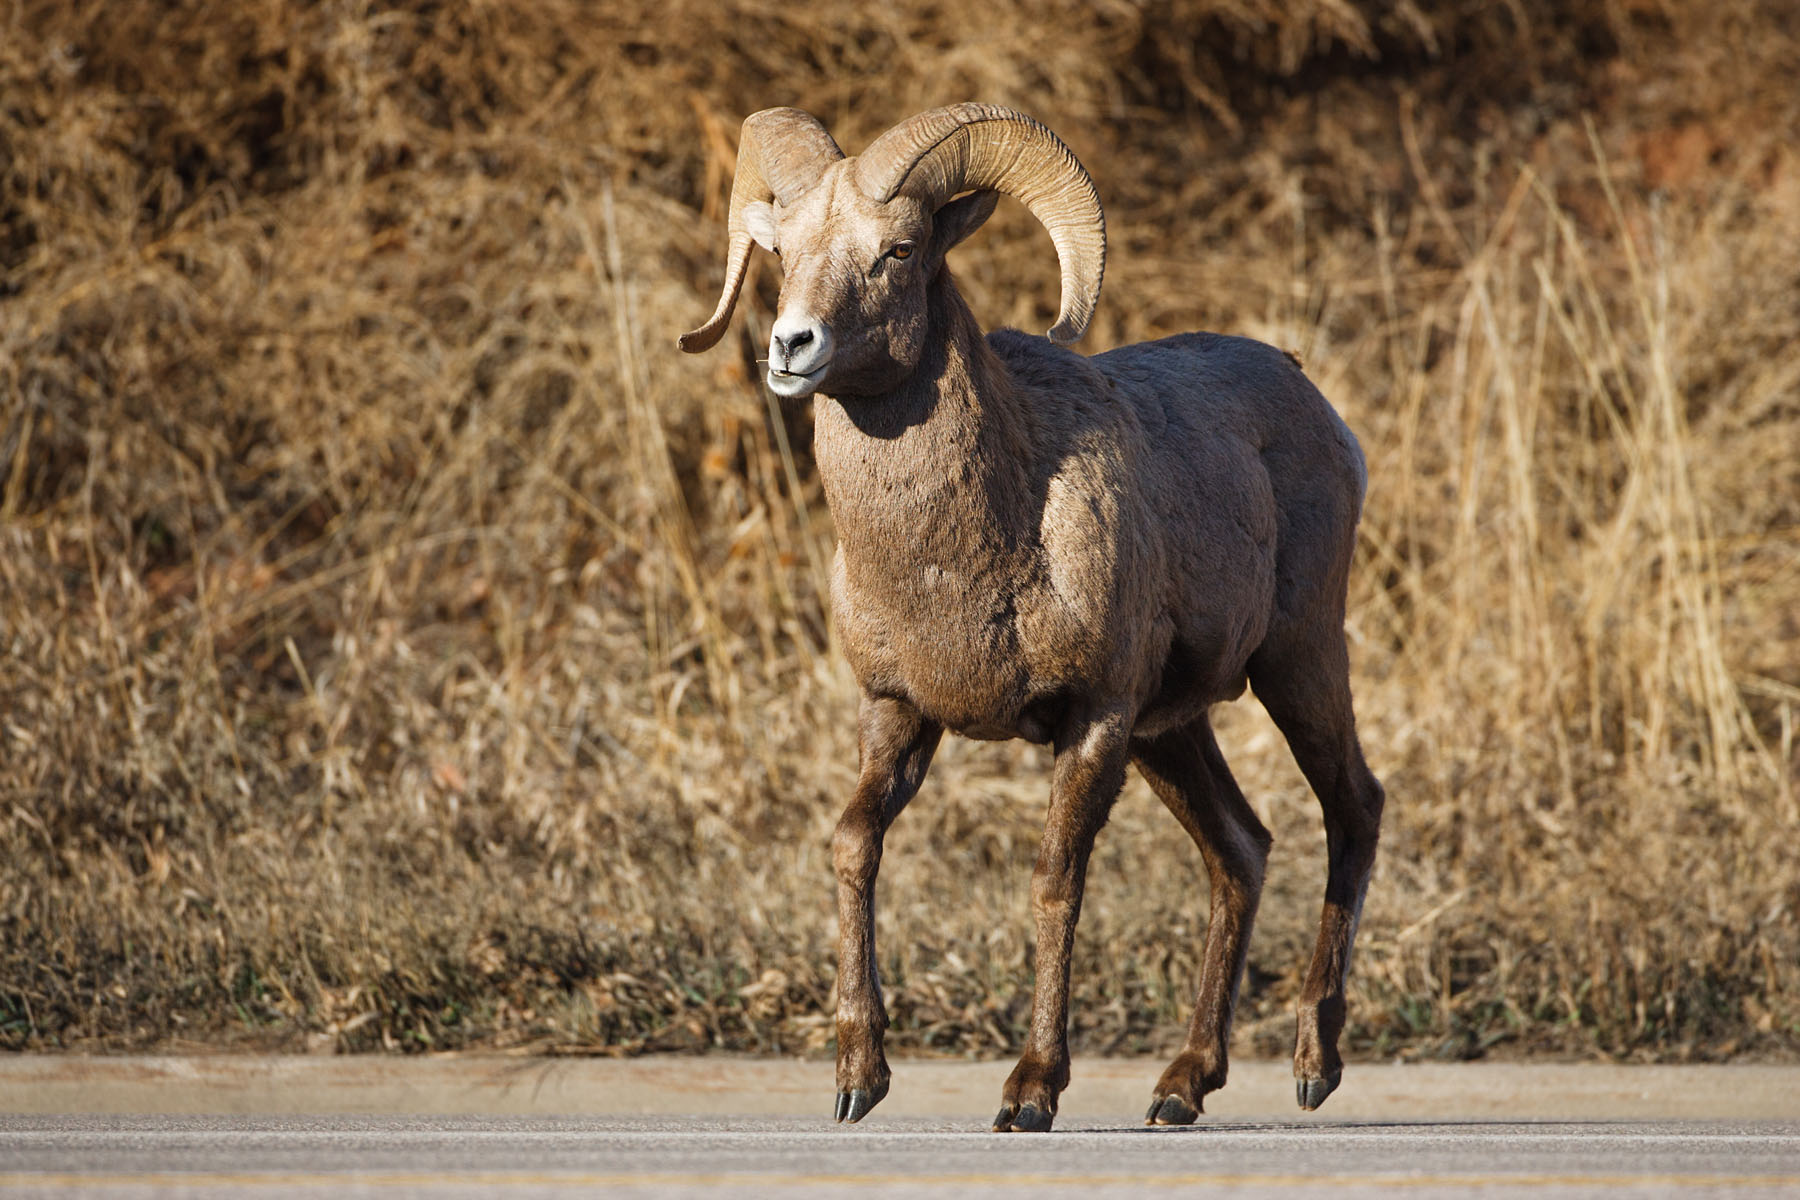 Rocky Mountain Bighorn crossing the highway, Cleghorn State Fish Hatchery, SD.  Click for next photo.